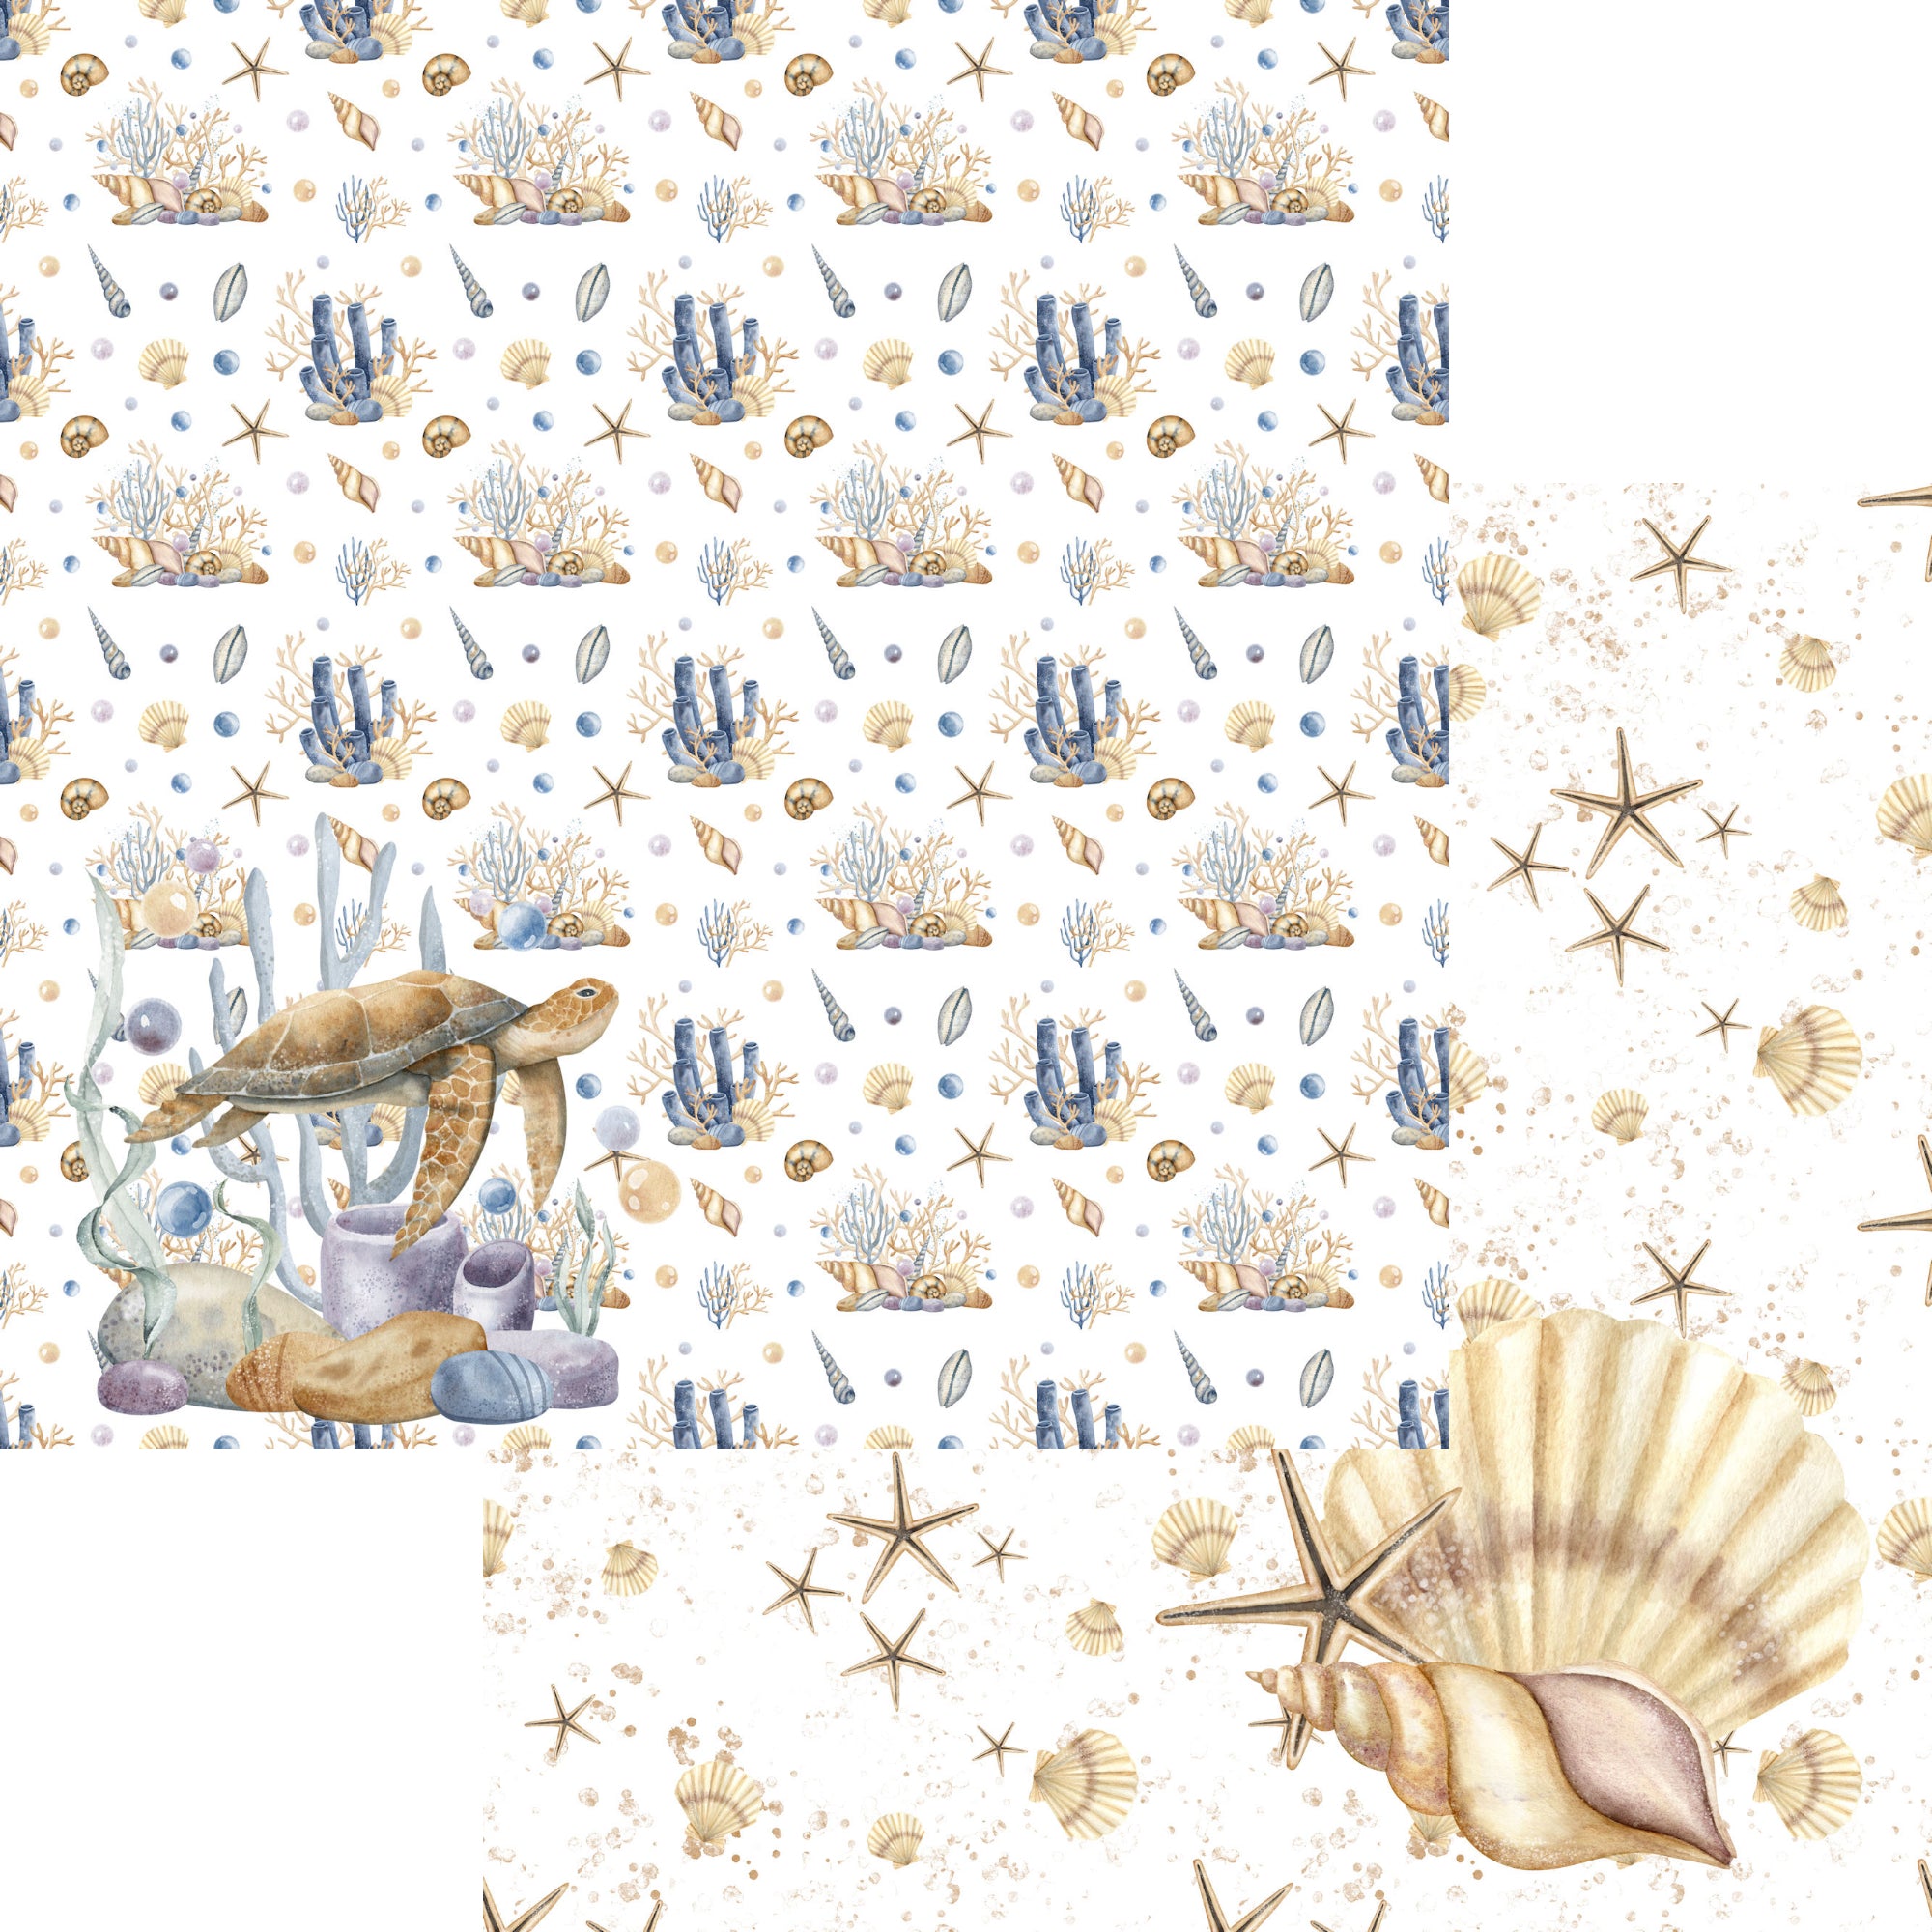 Seaside Dreams Collection Sea Turtle 12 x 12 Double-Sided Scrapbook Paper by SSC Designs